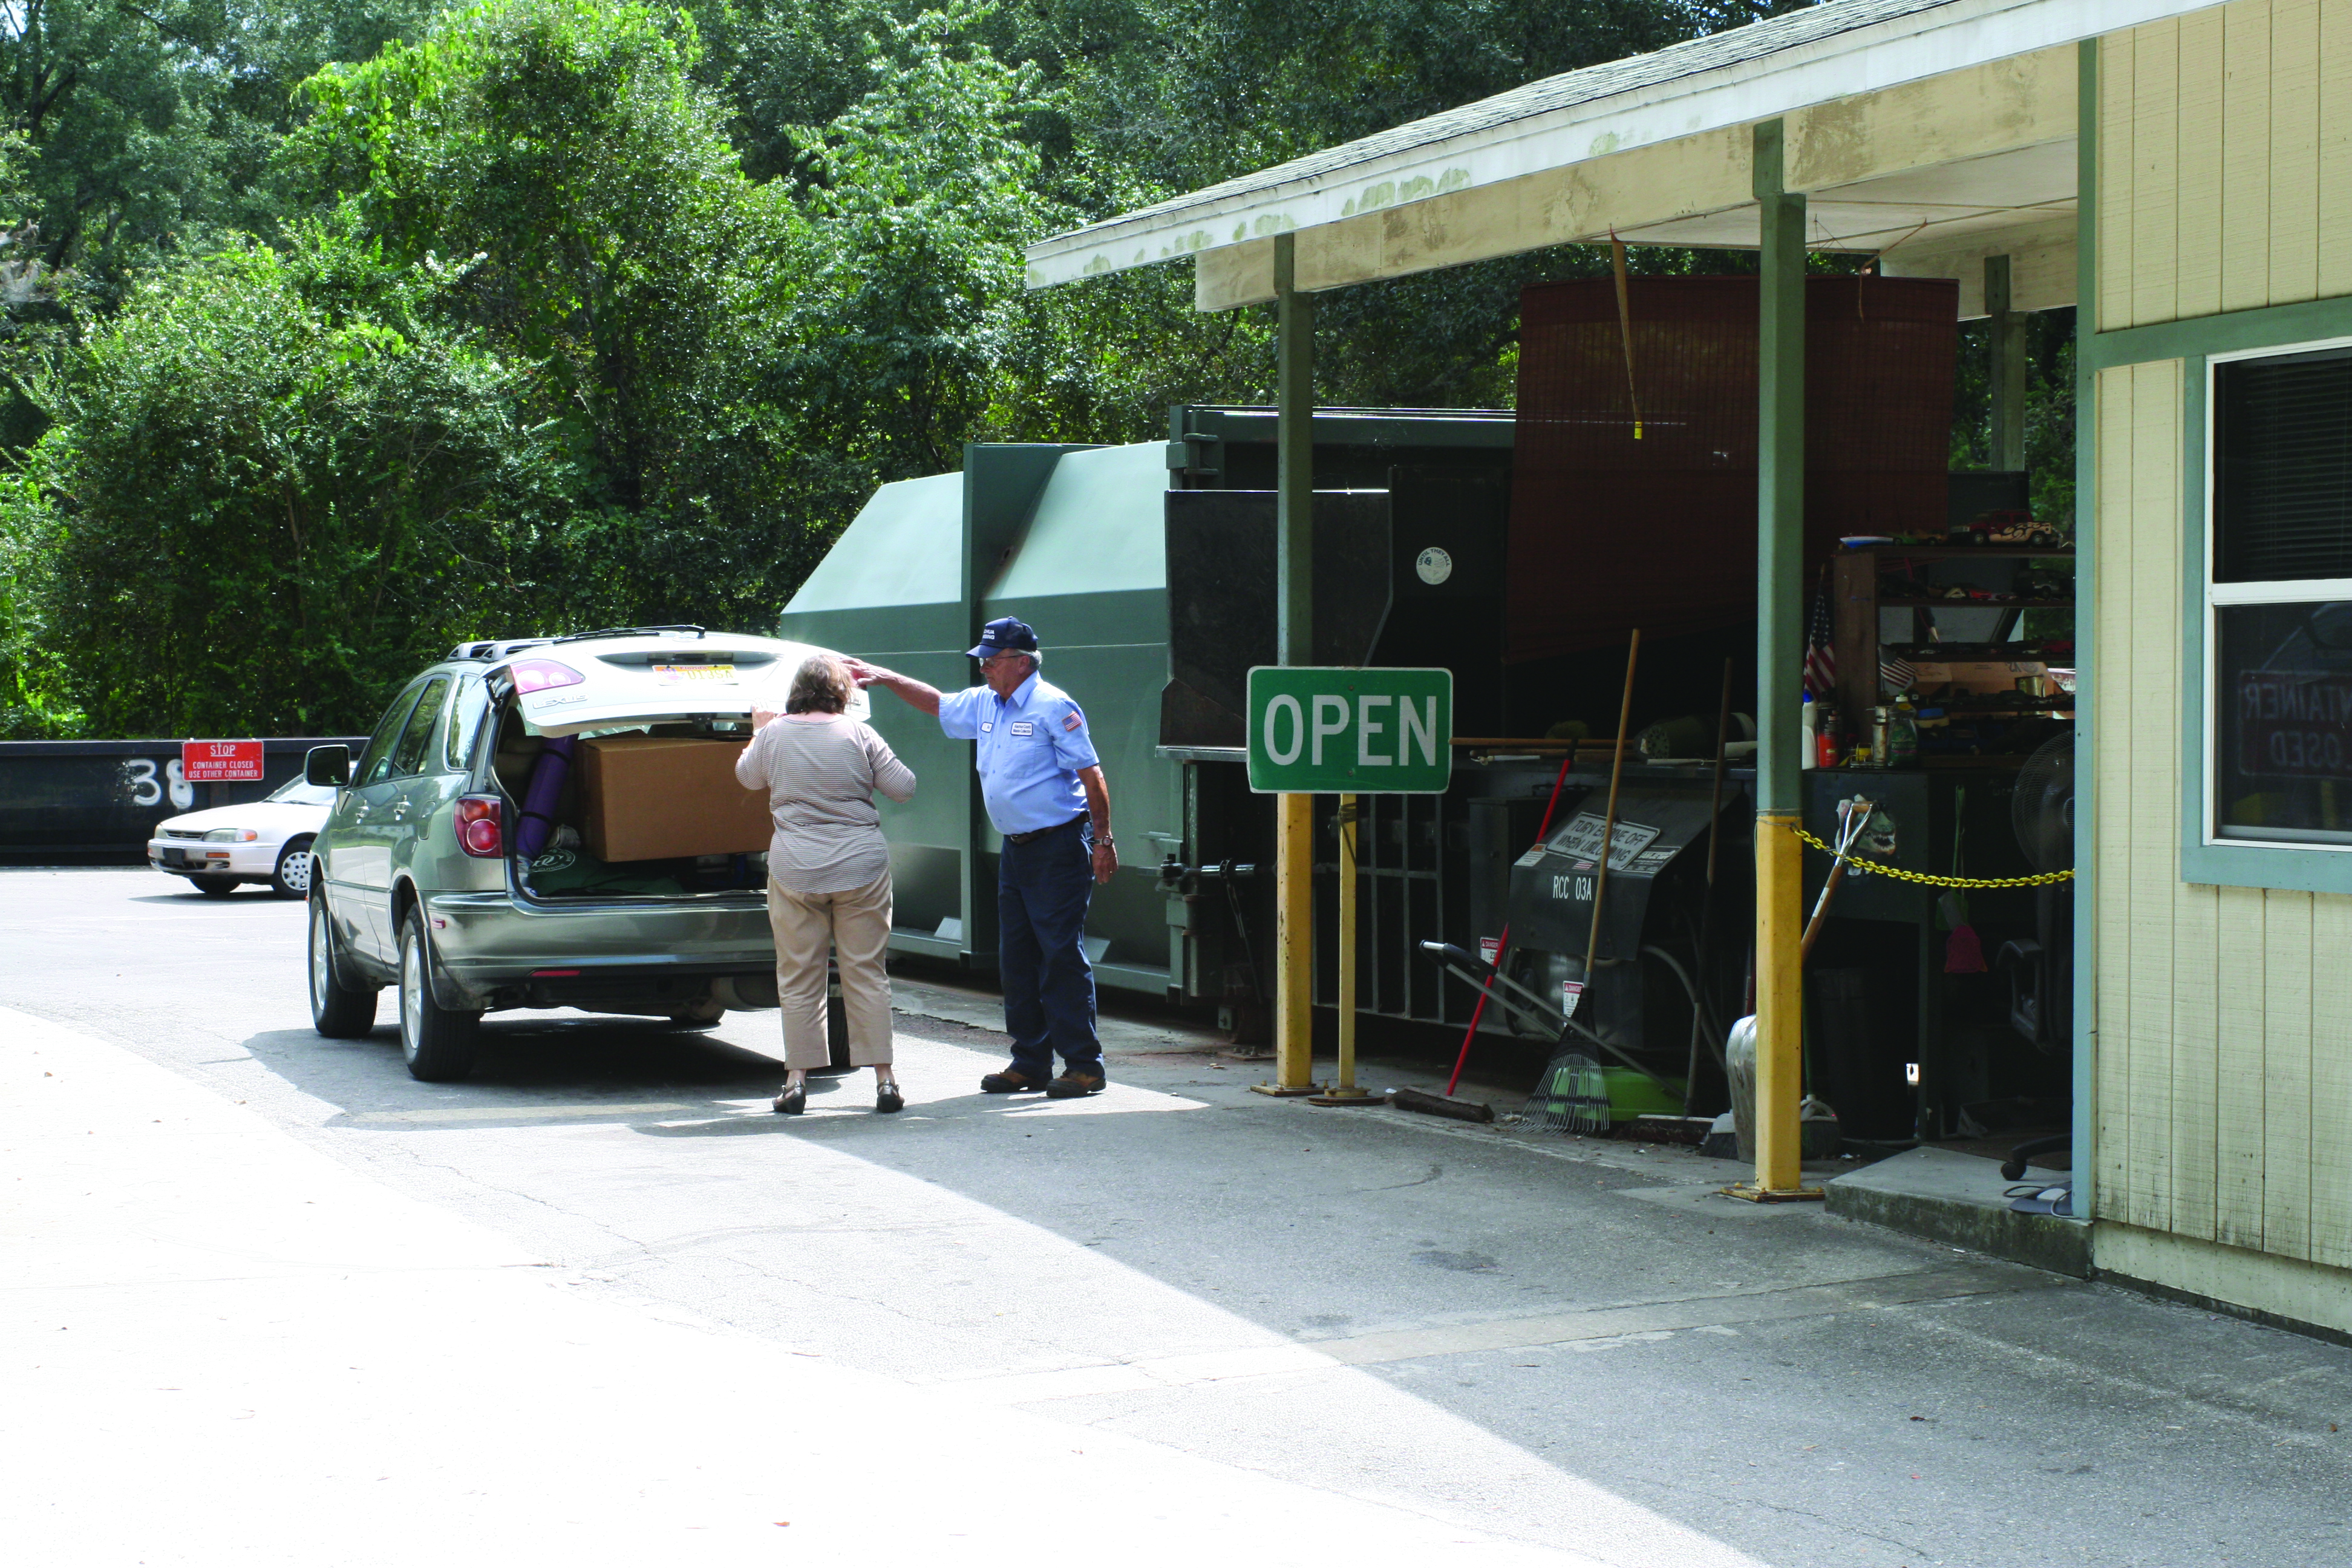 Image of Collection center attendant Helping customer alongside trash compactor.